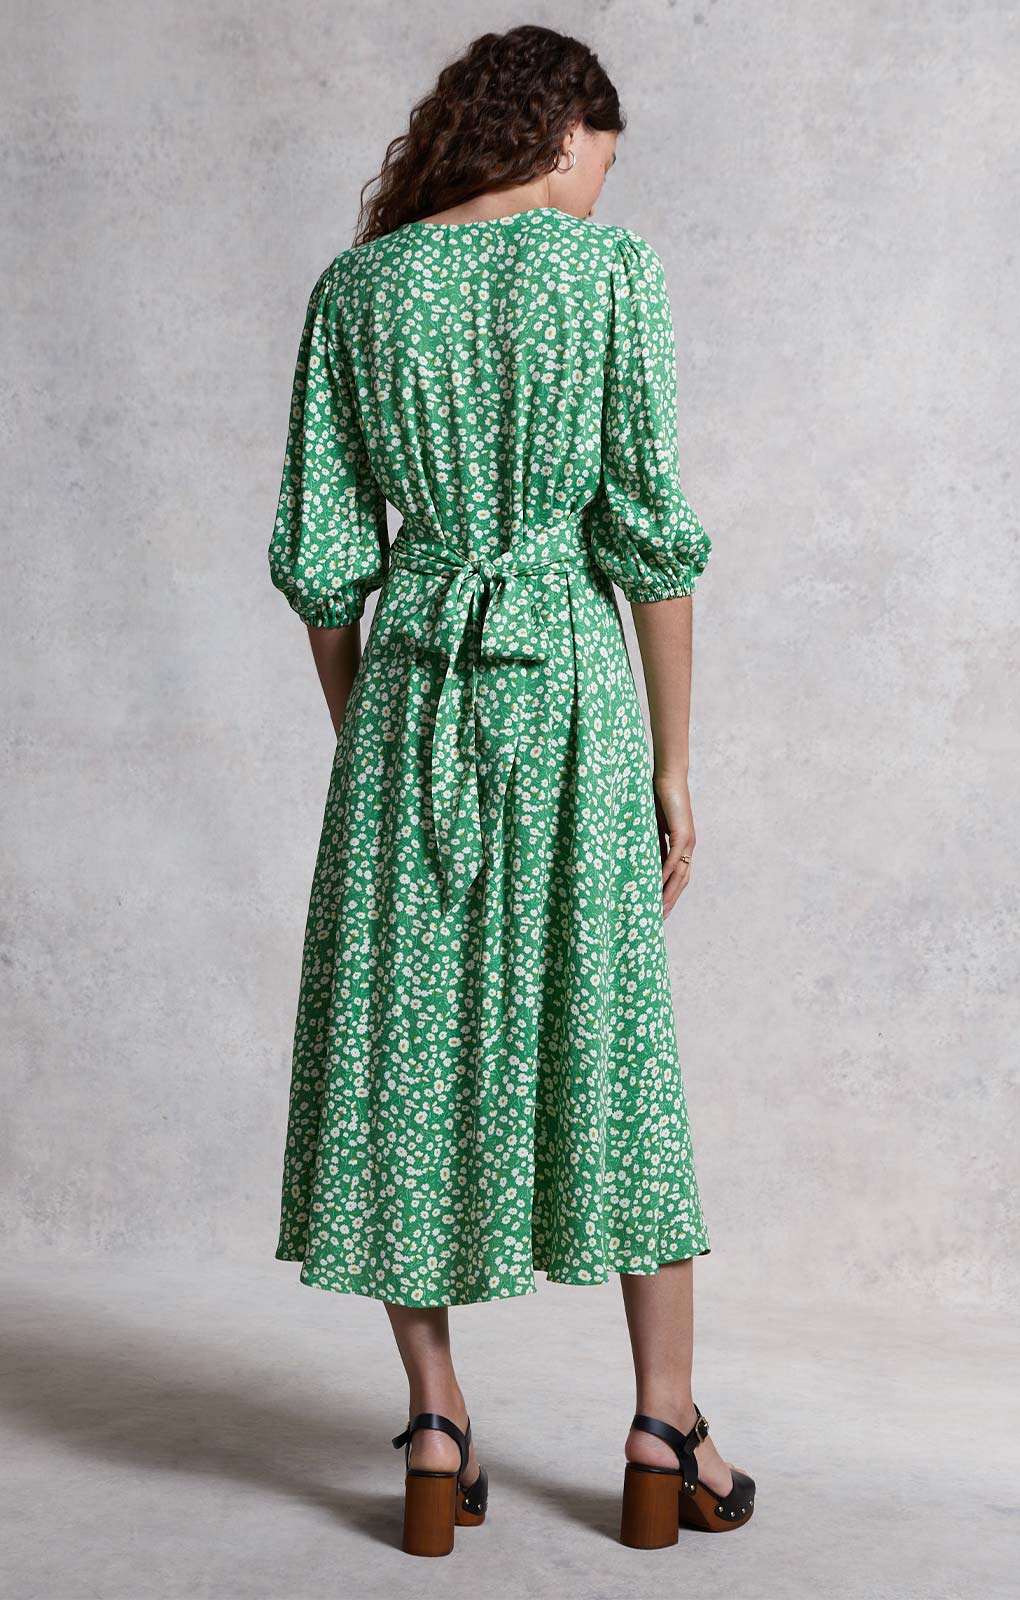 M&S X GHOST Green Floral V Neck Midi Dress product image